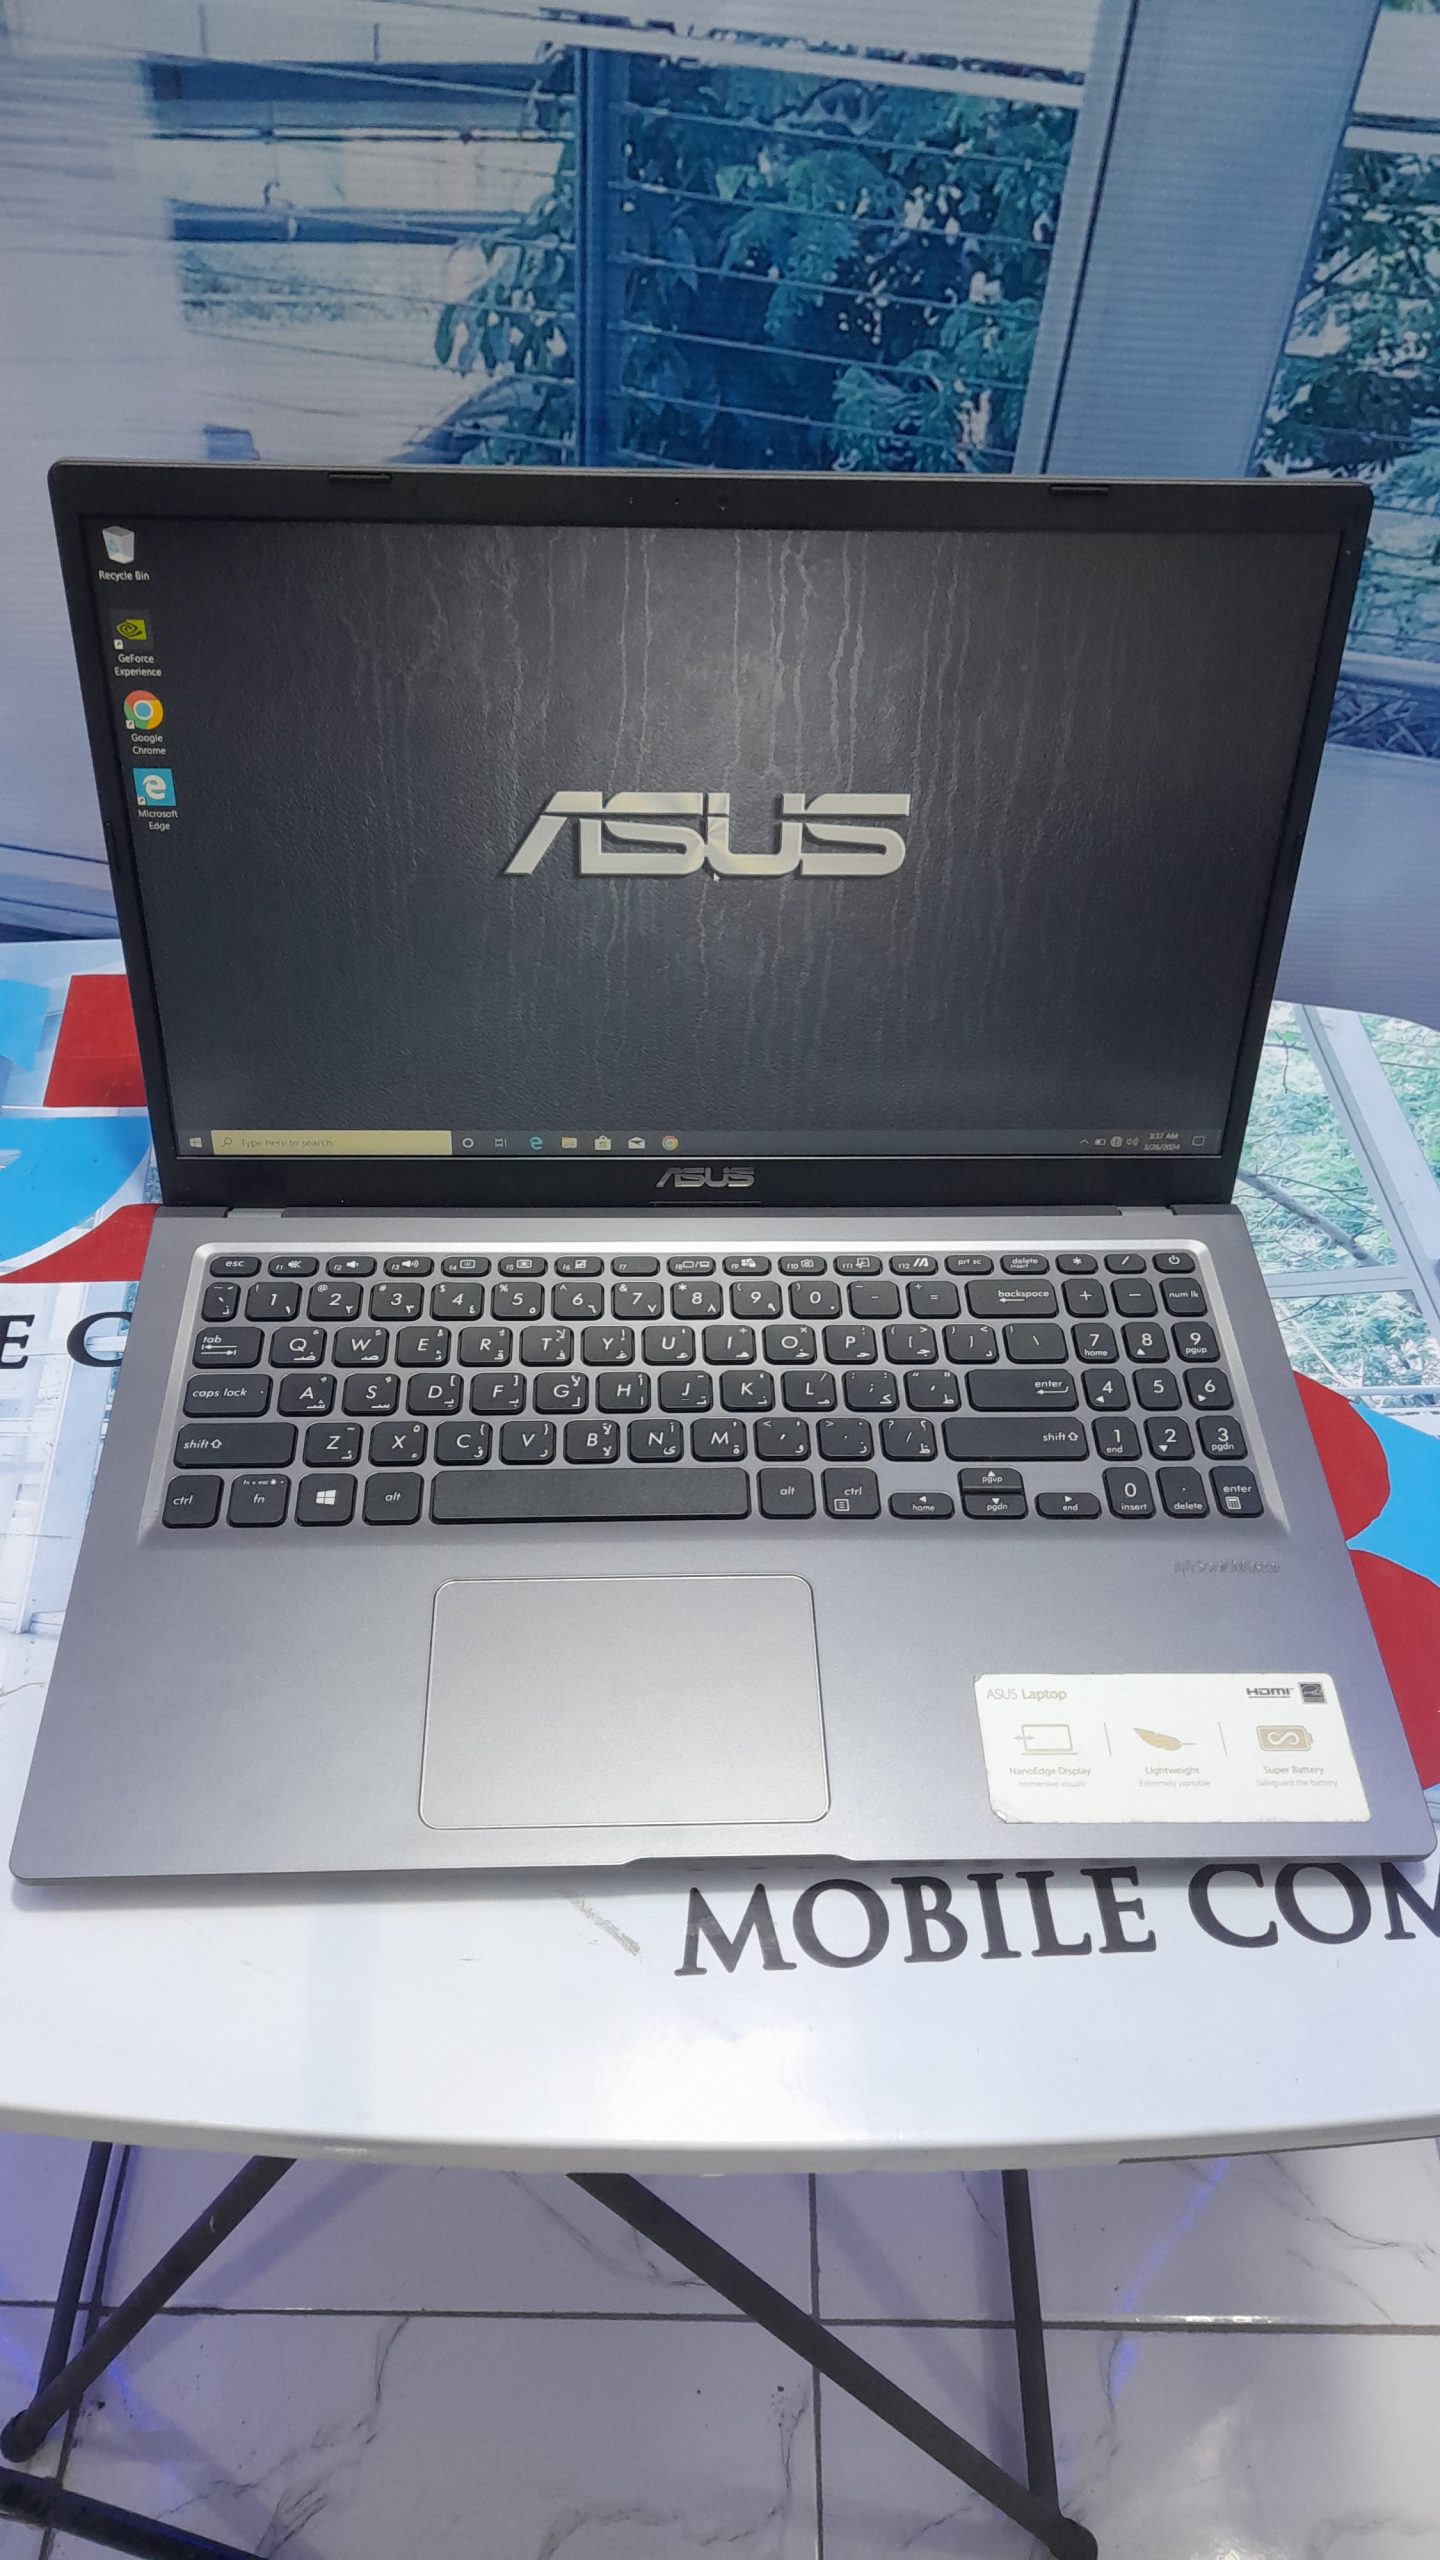 ASUS X515J Laptop | 10th Gen i5-10210U, 12GB, 512GB SSD, NVIDIA GeForce MX330 2GB used laptops for sale in lagos computer village, 8th generation laptop for sale in lagos nigeria, 12th generation hp laptop for sale in lagos ikeja,HP EliteBook1030 G1 8GB Intel Core I5 SSD 256GB, gbn mobile computer warehouse, laptop warehouse for ikeja computer vilage, laptop wholesale shop in lagos oshodi ikeja computer village ladipo mile2 lagos, hp intel core i7 laptops for sale, hp touch screen laptop for sale,uk used laptops on jumia, fairly used laptops for sale in ikeja, Used laptops for sale cheap , uk used laptops for sale in lagos ,HP EliteBook Folio 1040 G3 - 6th Gen. Intel Core i7 - 256GB SSD - 16GB RAM - 8GB Total Graphics - NonTouchscreen - keyboard Light - HDMI ,HP Folio 1040 G3 - 6th Generation Intel Core i5 - 256GB SSD - 8GB RAM - 4GB Total Graphics - Keypad Light - Touchscreen - HDMI,american used lenovo thinkpad T460s for sale in lagos computer village lagos, used laptops for sale, canada used laptops for sale in lagos computer village, affordable laptops for sale in ikeja compkuter village, wholesale computer shop in ikeja, best computer engineering shop in ikeja computer village, how to start laptop business in lagos, laptop for sale in oshodi, laptops for sale in ikeja, laptops for sale in lagos island, laptops for sale in wholesale in alaba international lagos, wholes computer shops in alaba international market lagos, laptops for sale in ladipo lagos, affordable laptops for sale in trade fair lagos,new american hp laptop arrival in ikeja, best hp laptops for sale in computer village, HP ProBook 450 G4 8GB Intel Core I5 HDD 1TB For sale in ikeja computer village,HP ProBook 450 G4 For sale in ikeja computer village,Dell Latitude 7490 Intel Core i7-8650U 8th Generation,HP EliteBook 840 G3 - 6th Gen. Intel Core i7 - 256GB SSD - 8GB RAM - 8GB Total Graphics - Keypad Light - Non-Touchscreen ,used laptops for sale in nigeria,HP EliteBook 840 G5 7th Generation. Intel Core i7 – Touch Screen-256GB SSD – 8GB RAM –8GB Total Graphics,HP 840 G1 4th Gen. Intel Core i7 8GB RAM 500GB HDD Keypad Light Touchscreen, used laptops for sale in lagos computer village, 8th generation laptop for sale in lagos nigeria, 12th generation hp laptop for sale in lagos ikeja,HP EliteBook1030 G1 8GB Intel Core I5 SSD 256GB, gbn mobile computer warehouse, laptop warehouse for ikeja computer vilage, laptop wholesale shop in lagos oshodi ikeja computer village ladipo mile2 lagos, hp intel core i7 laptops for sale, hp touch screen laptop for sale,uk used laptops on jumia, fairly used laptops for sale in ikeja, Used laptops for sale cheap , uk used laptops for sale in lagos ,HP EliteBook Folio 1040 G3 - 6th Gen. Intel Core i7 - 256GB SSD - 16GB RAM - 8GB Total Graphics - NonTouchscreen - keyboard Light - HDMI ,HP Folio 1040 G3 - 6th Generation Intel Core i5 - 256GB SSD - 8GB RAM - 4GB Total Graphics - Keypad Light - Touchscreen - HDMI,american used lenovo thinkpad T460s for sale in lagos computer village lagos, used laptops for sale, canada used laptops for sale in lagos computer village, affordable laptops for sale in ikeja compkuter village, wholesale computer shop in ikeja, best computer engineering shop in ikeja computer village, how to start laptop business in lagos, laptop for sale in oshodi, laptops for sale in ikeja, laptops for sale in lagos island, laptops for sale in wholesale in alaba international lagos, wholes computer shops in alaba international market lagos, laptops for sale in ladipo lagos, affordable laptops for sale in trade fair lagos,new american hp laptop arrival in ikeja, best hp laptops for sale in computer village, HP ProBook 450 G4 8GB Intel Core I5 HDD 1TB For sale in ikeja computer village,HP ProBook 450 G4 For sale in ikeja computer village,Dell Latitude 7490 Intel Core i7-8650U 8th Generation,HP EliteBook 840 G3 - 6th Gen. Intel Core i7 - 256GB SSD - 8GB RAM - 8GB Total Graphics - Keypad Light - Non-Touchscreen ,used laptops for sale in nigeria,HP EliteBook 840 G5 7th Generation. Intel Core i7 – Touch Screen-256GB SSD – 8GB RAM –8GB Total Graphics